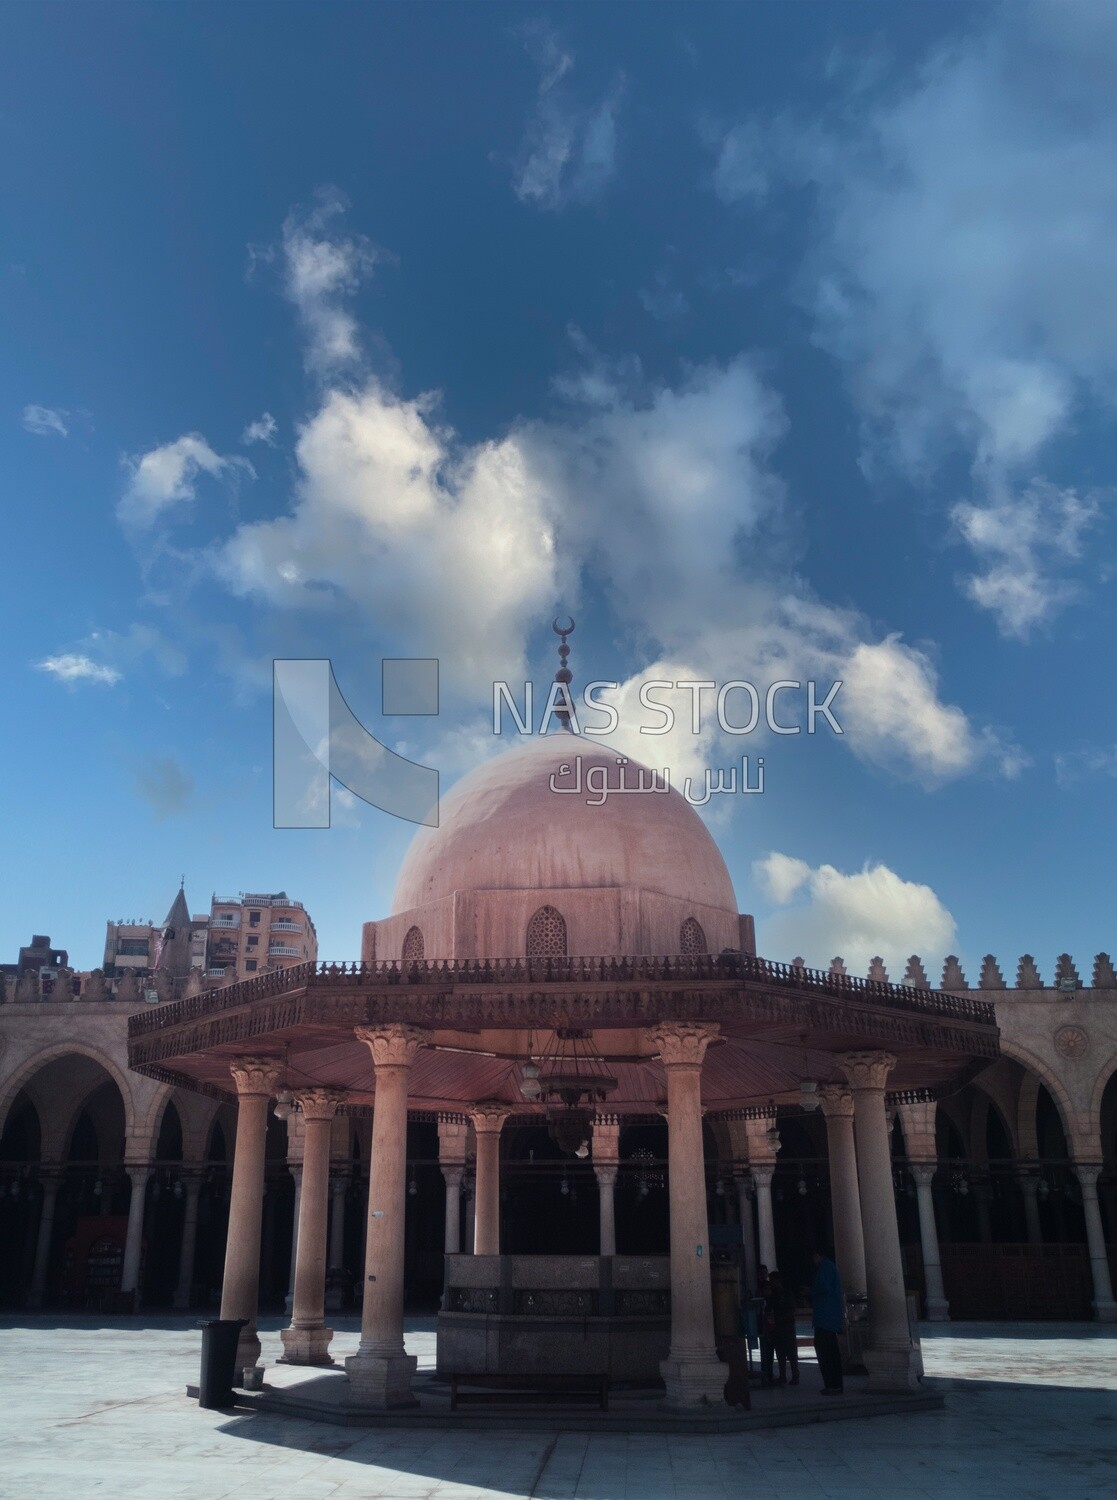 The Mosque of Amr ibn al-a'as, Tourism in Egypt, Famous landmarks in Egypt